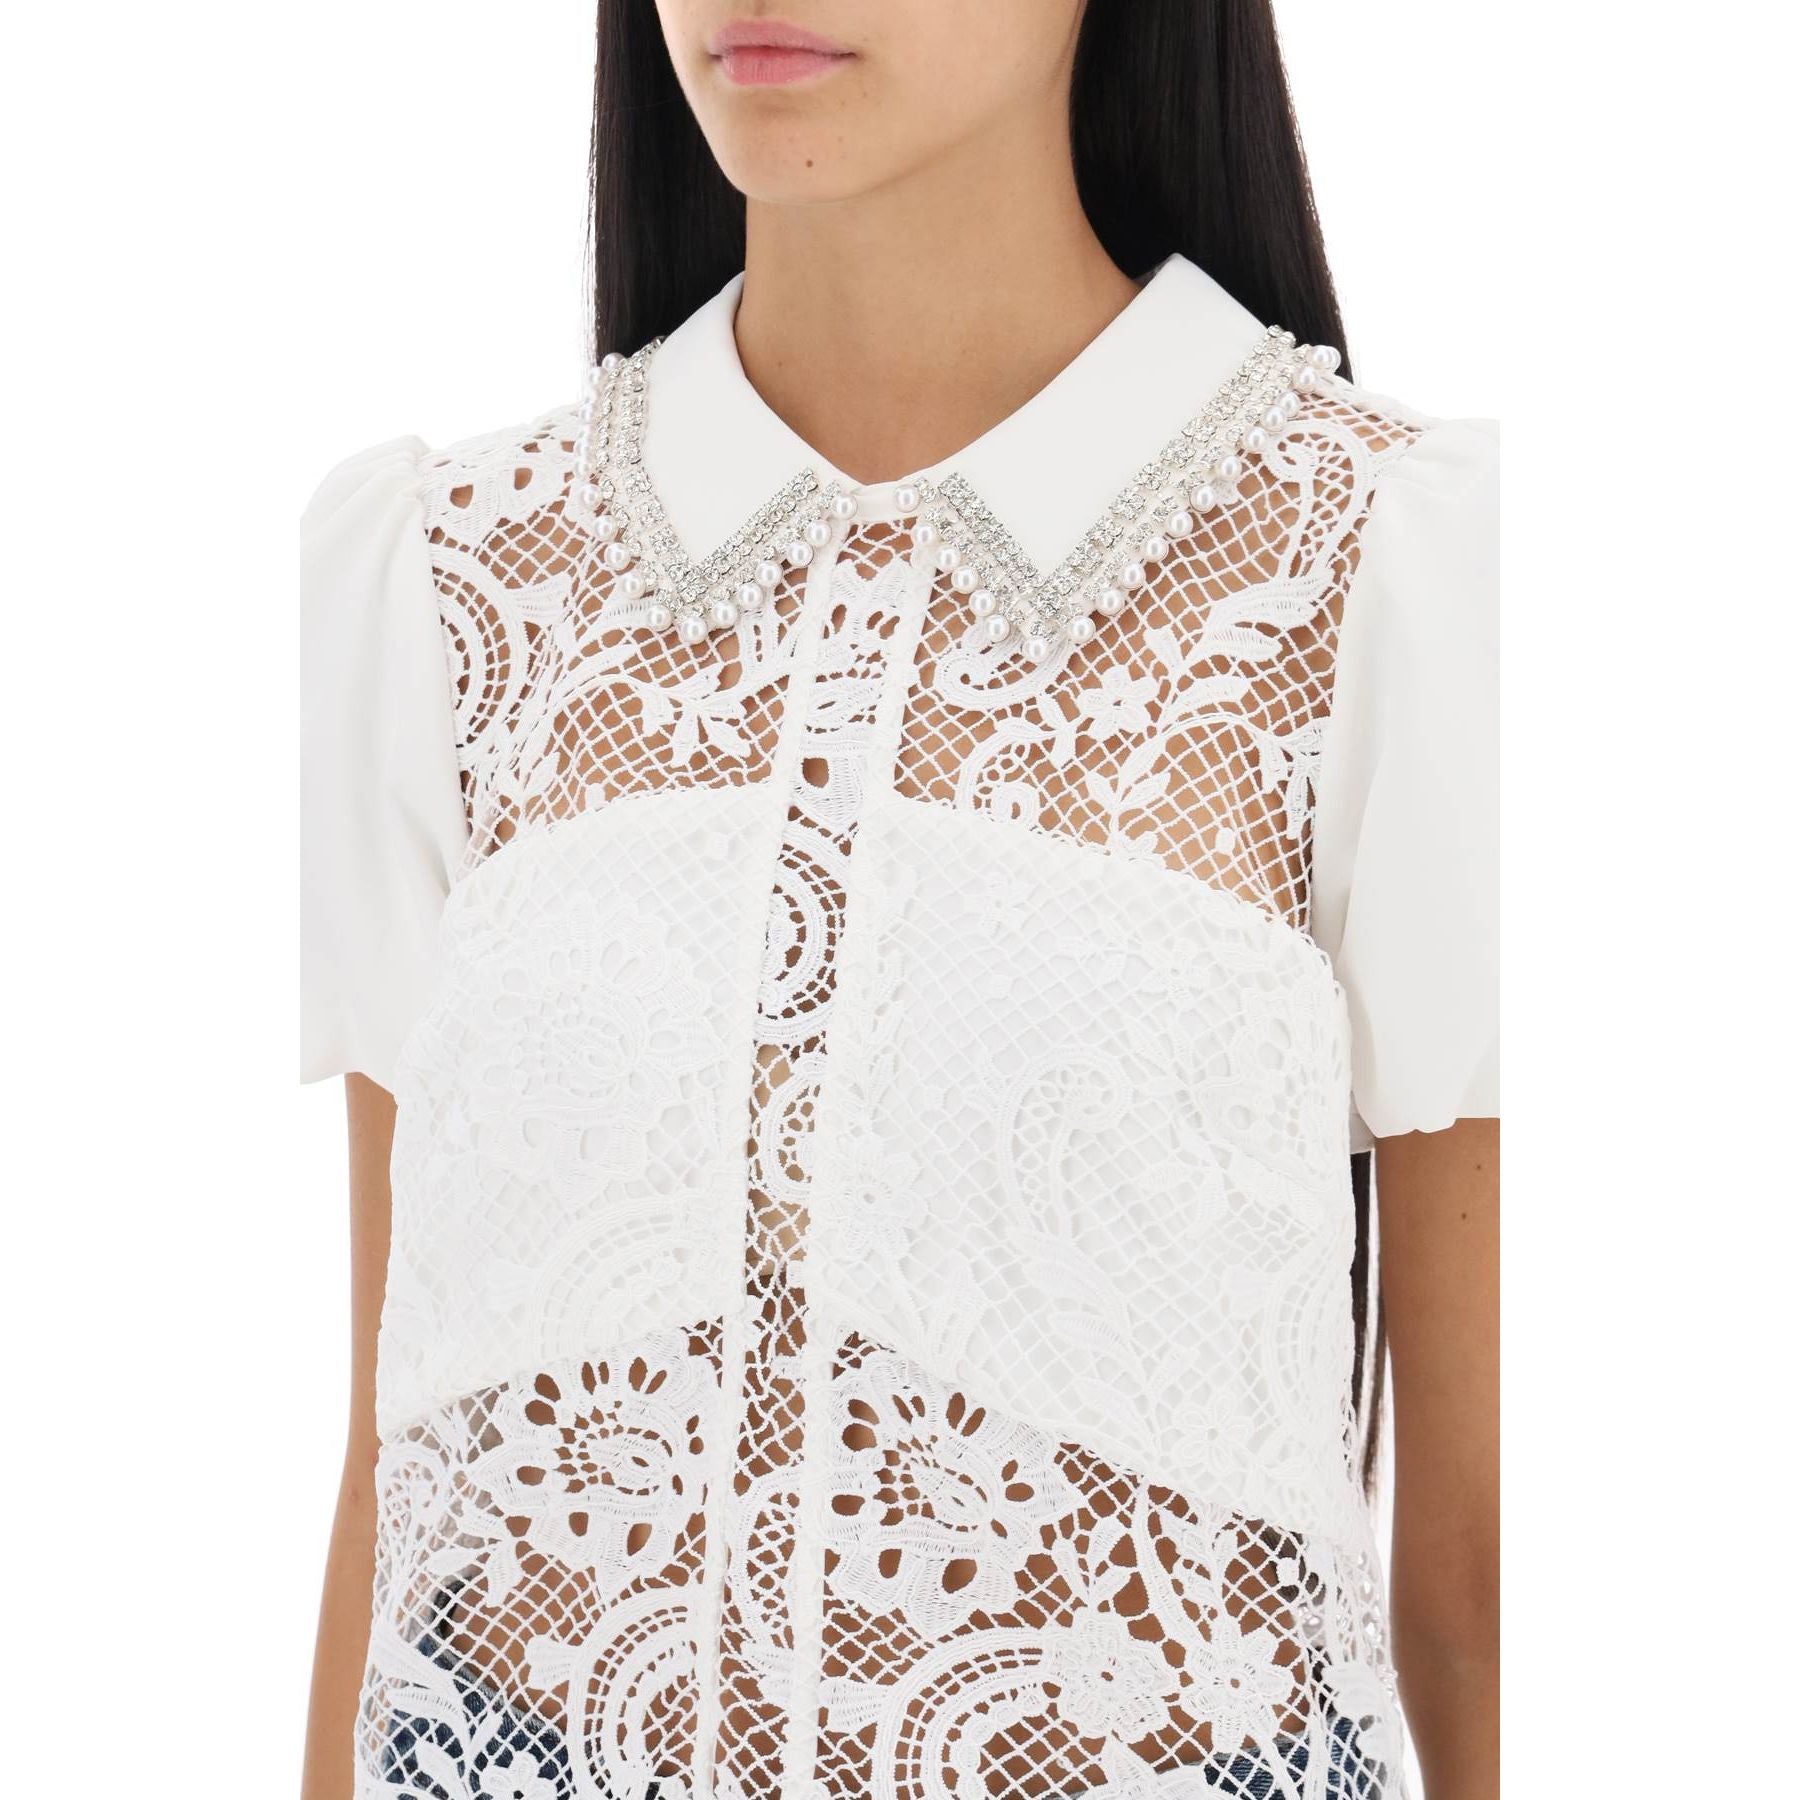 Floral Lace Top With Appliques